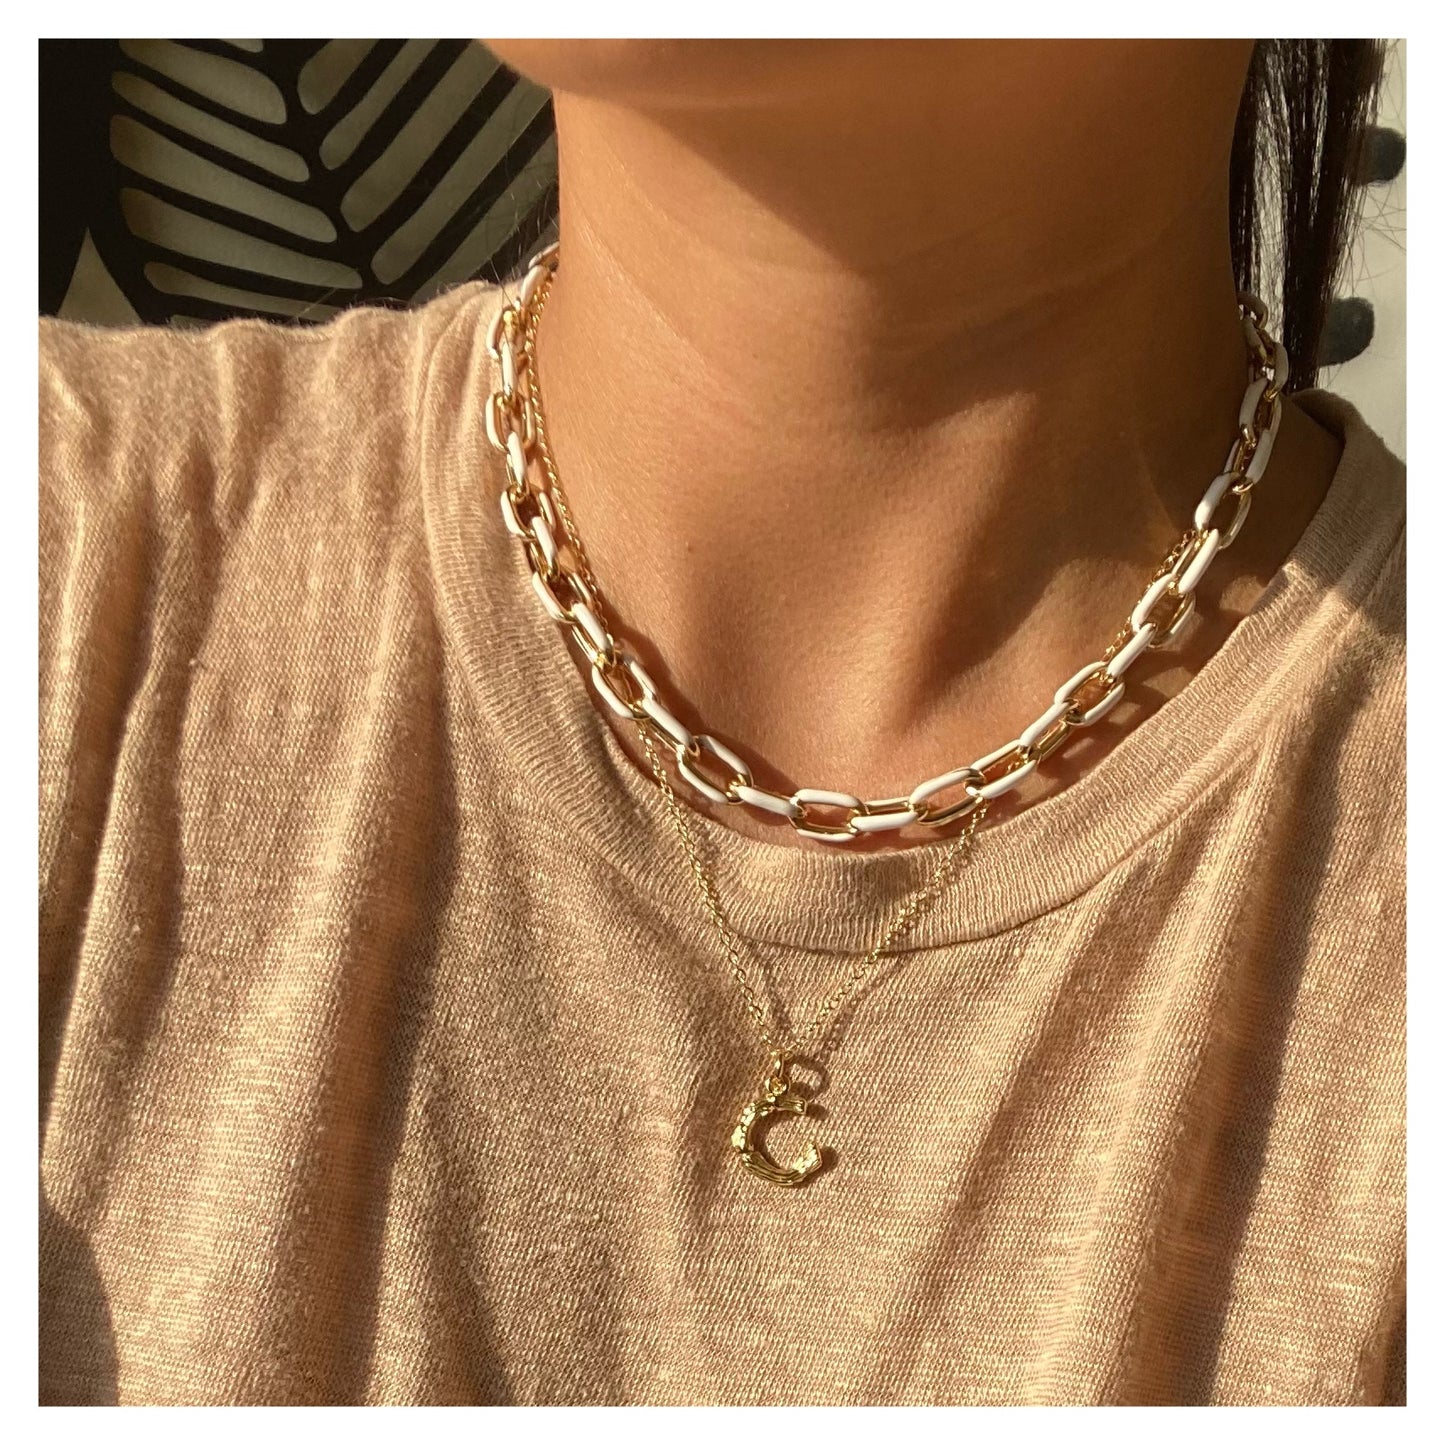 White Chunky Chain Necklace